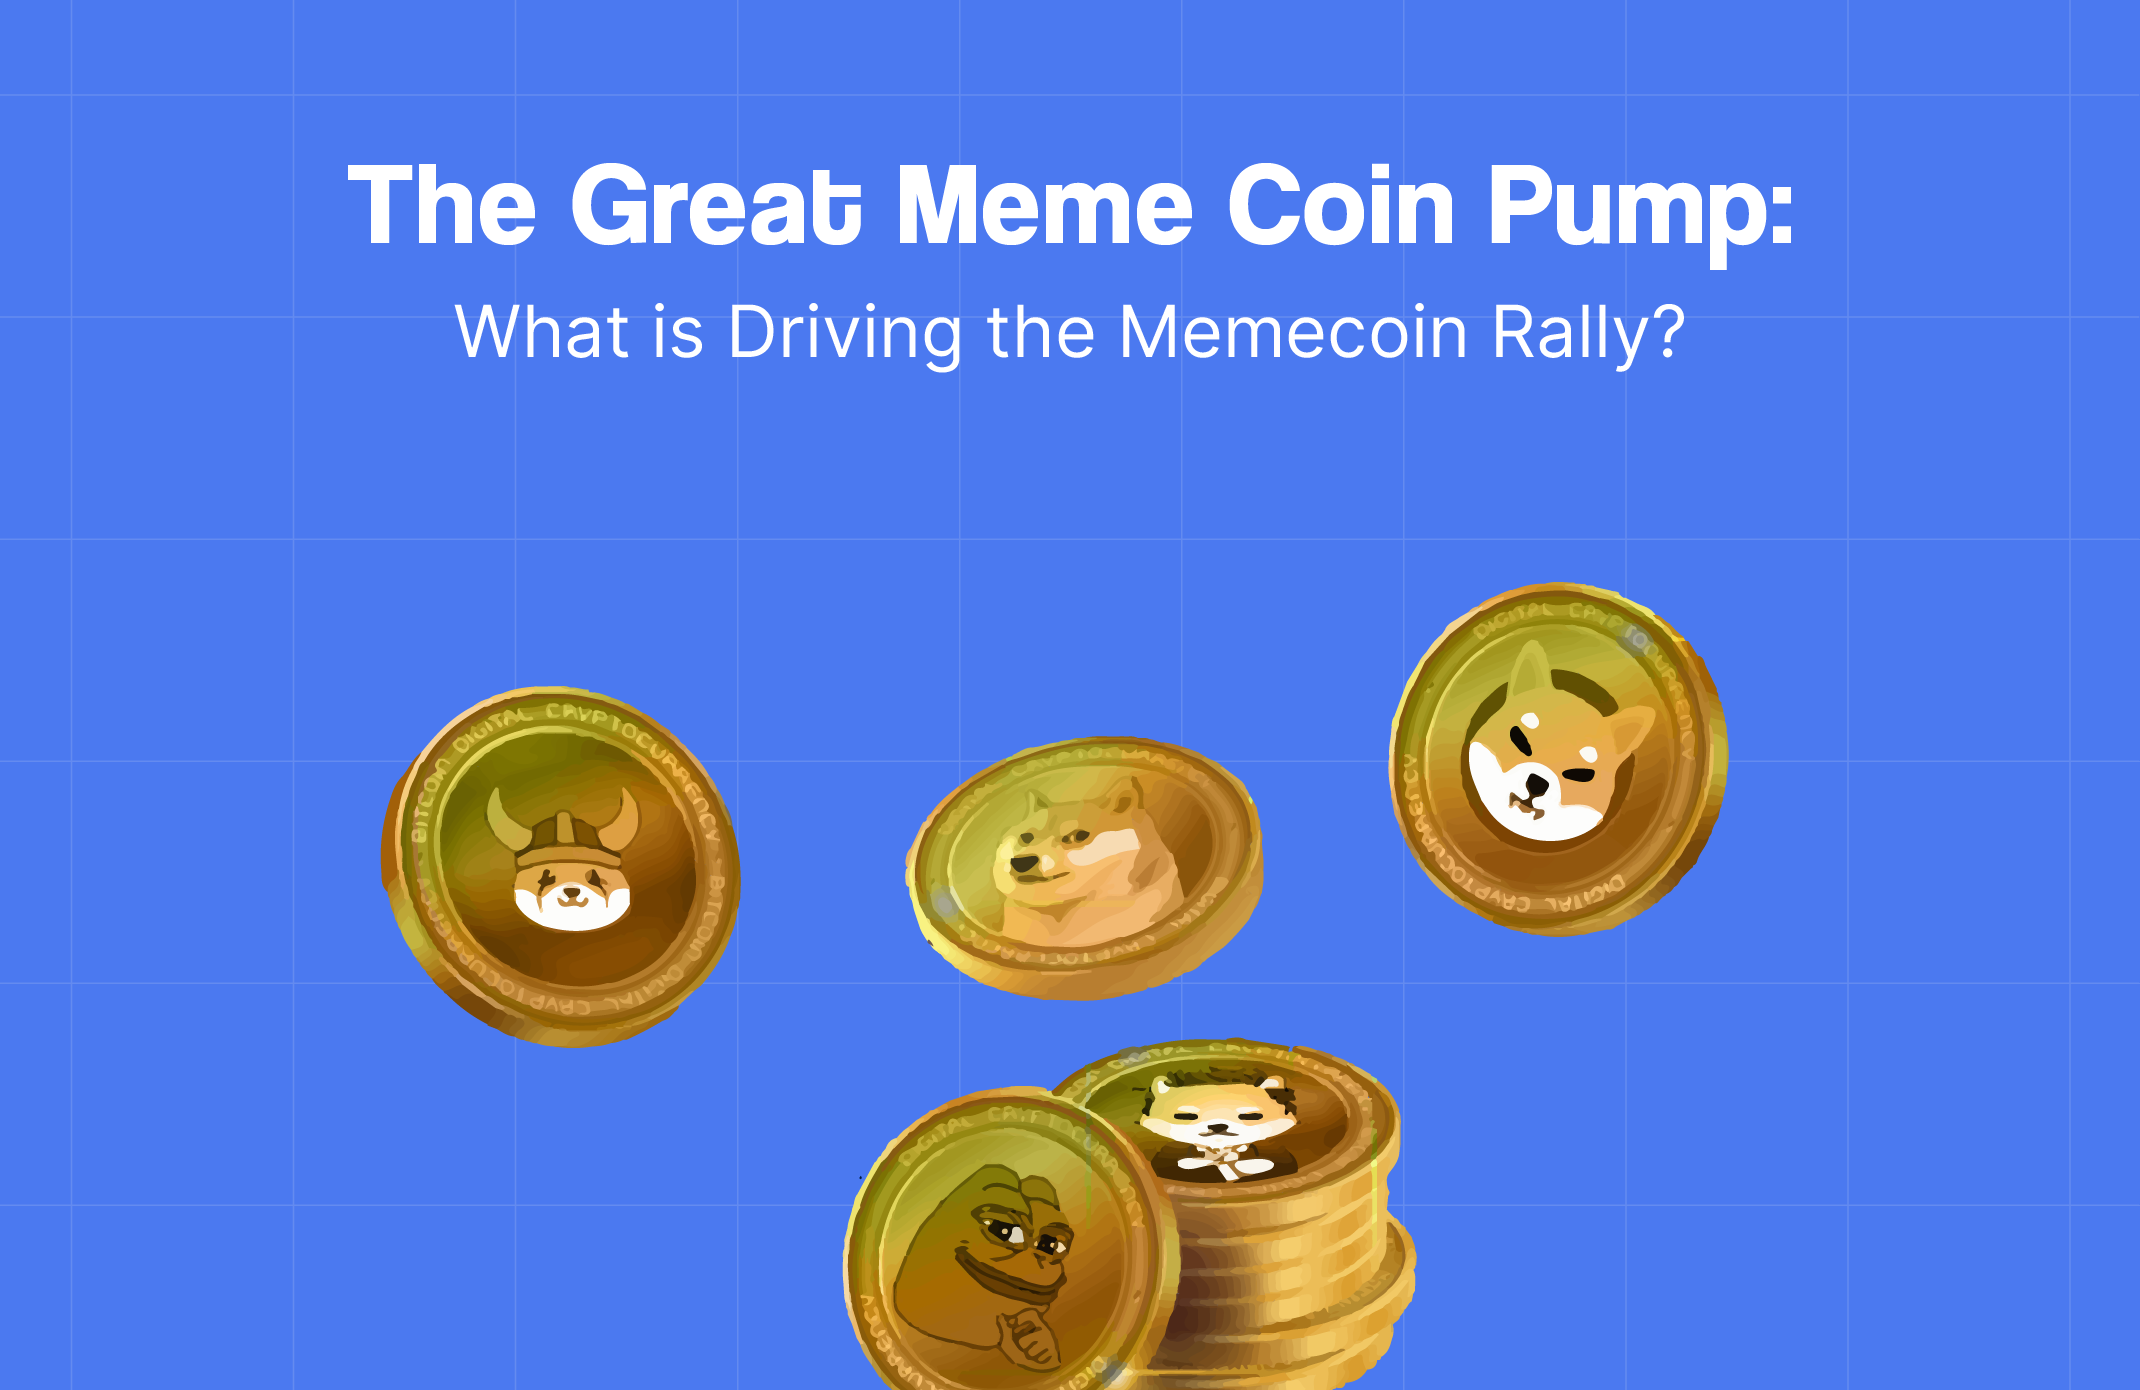 The Great Meme Coin Pump: What is Driving the Memecoin Rally?